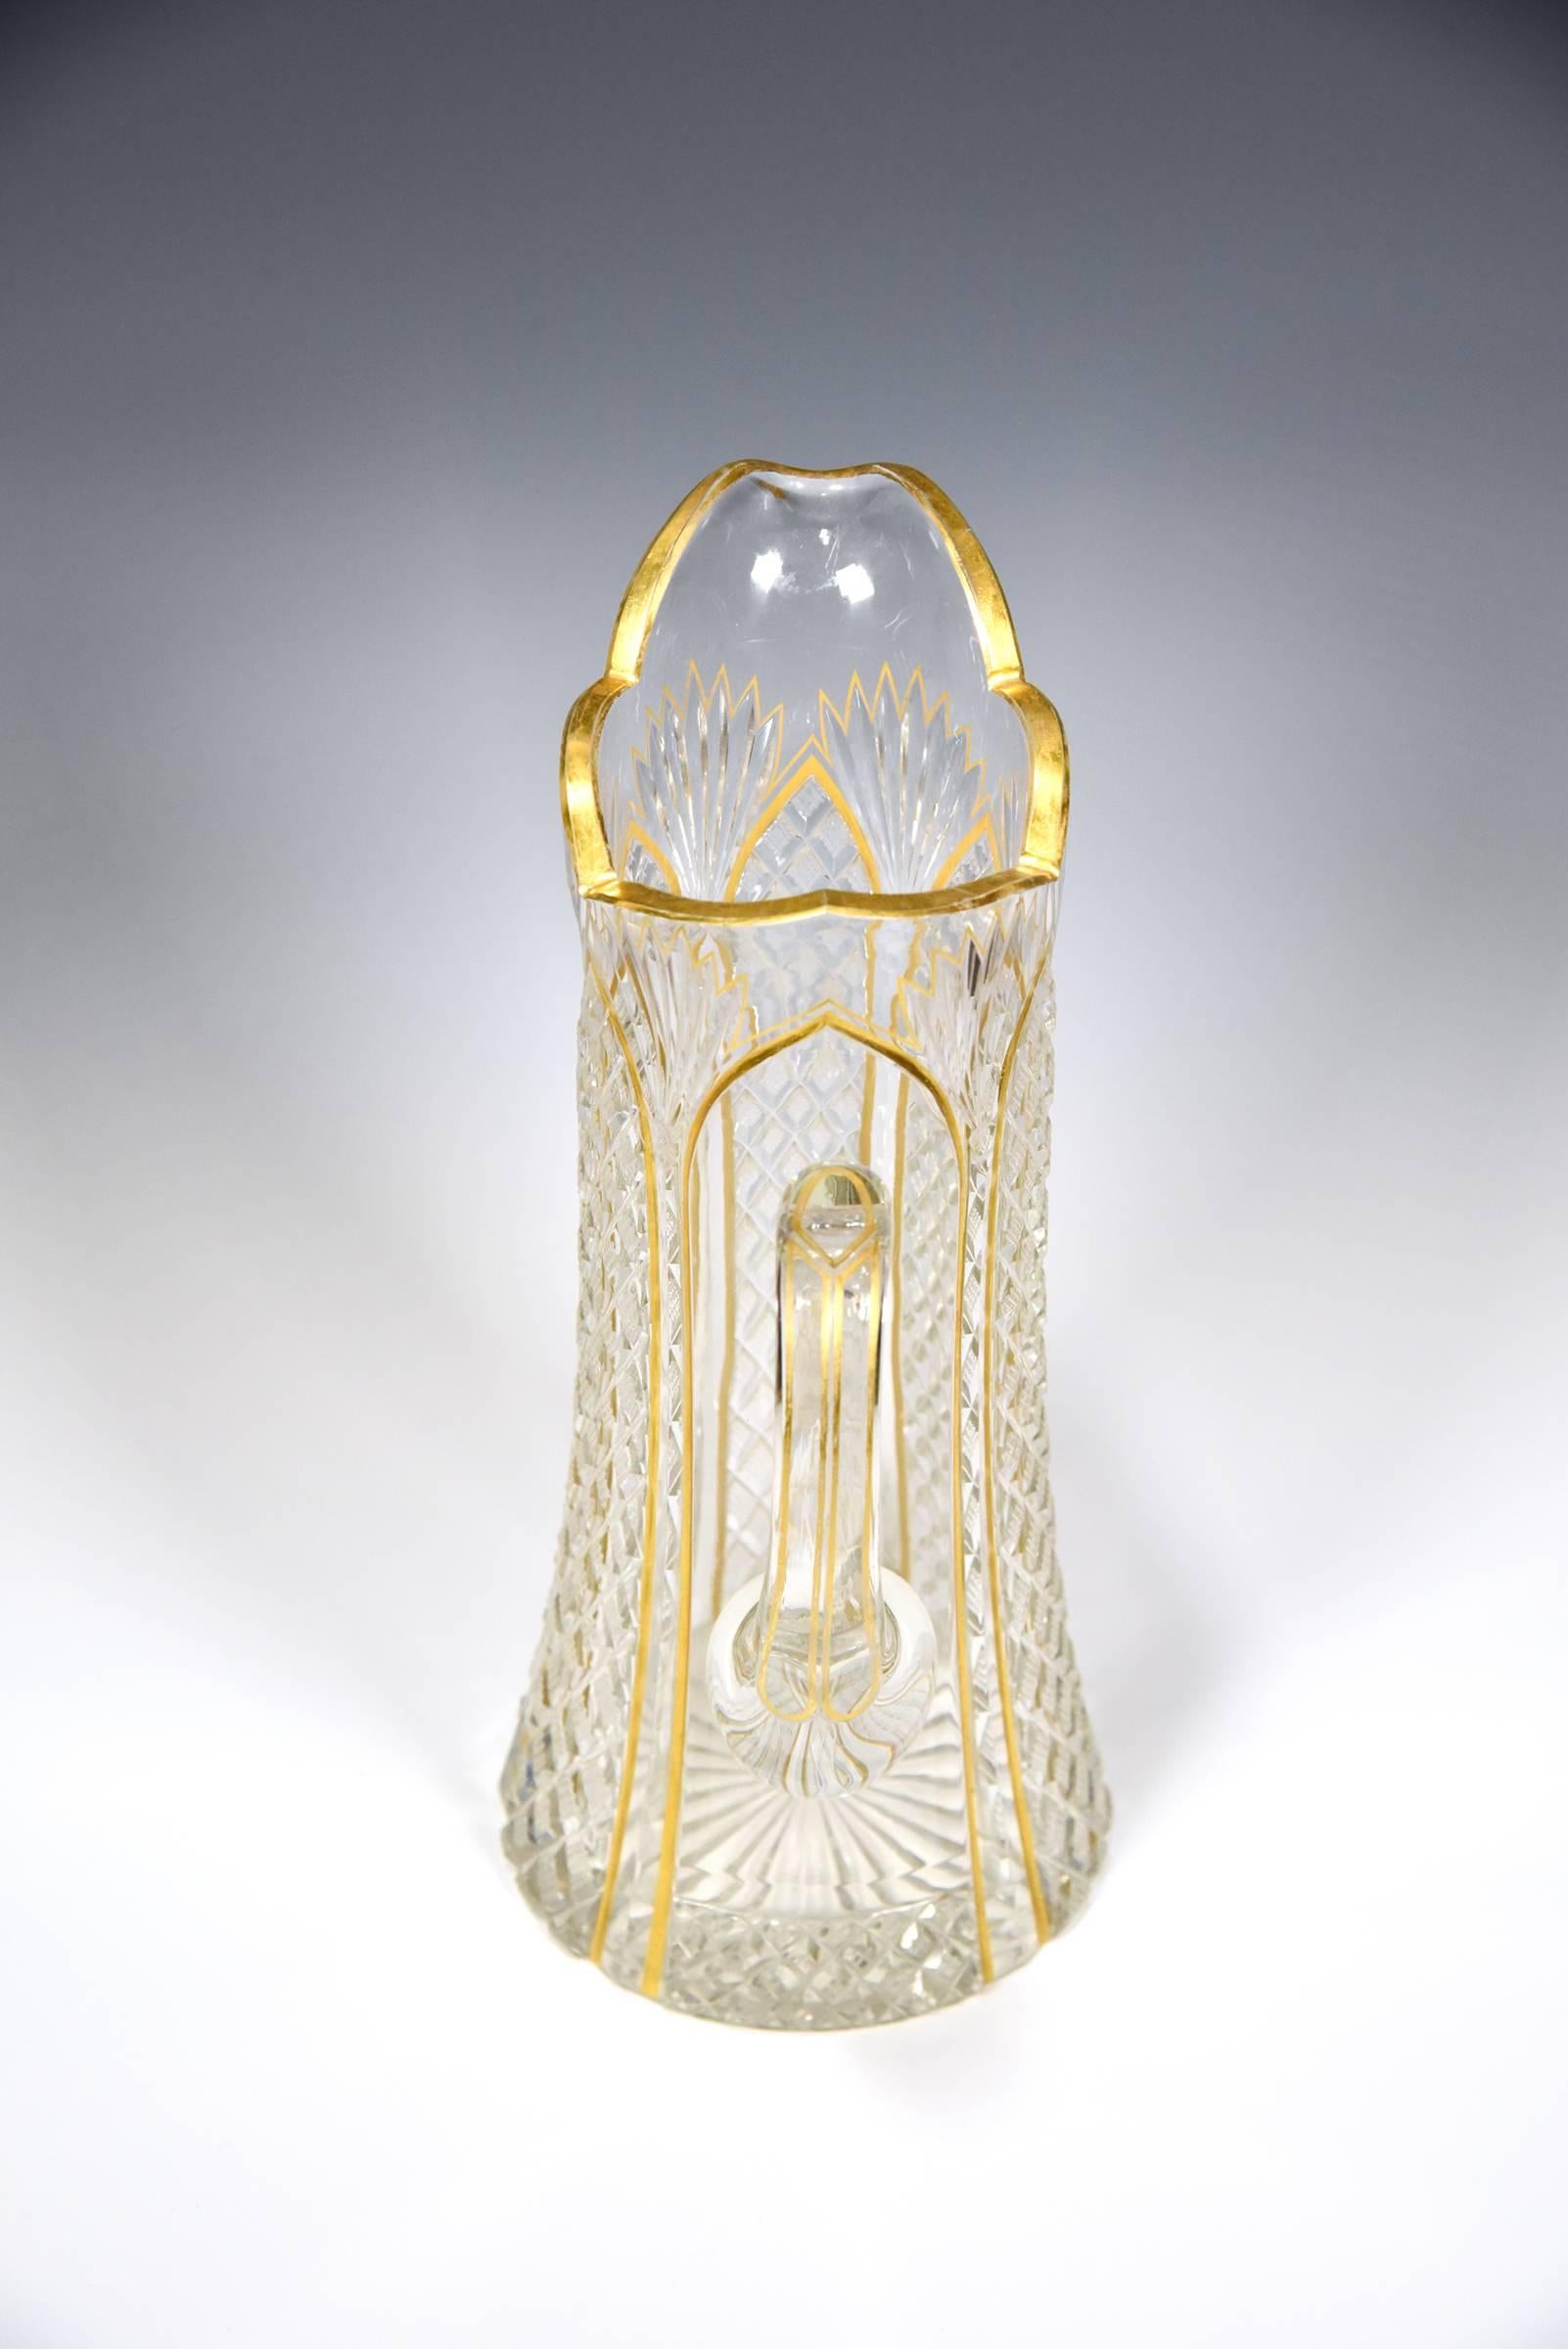 This is a stunning 19th century handblown crystal pitcher, attributed to Baccarat, which features all-over cutting and further embellished by finely enameled gilt decoration. The workmanship is extremely well-done and the geometric cutting is